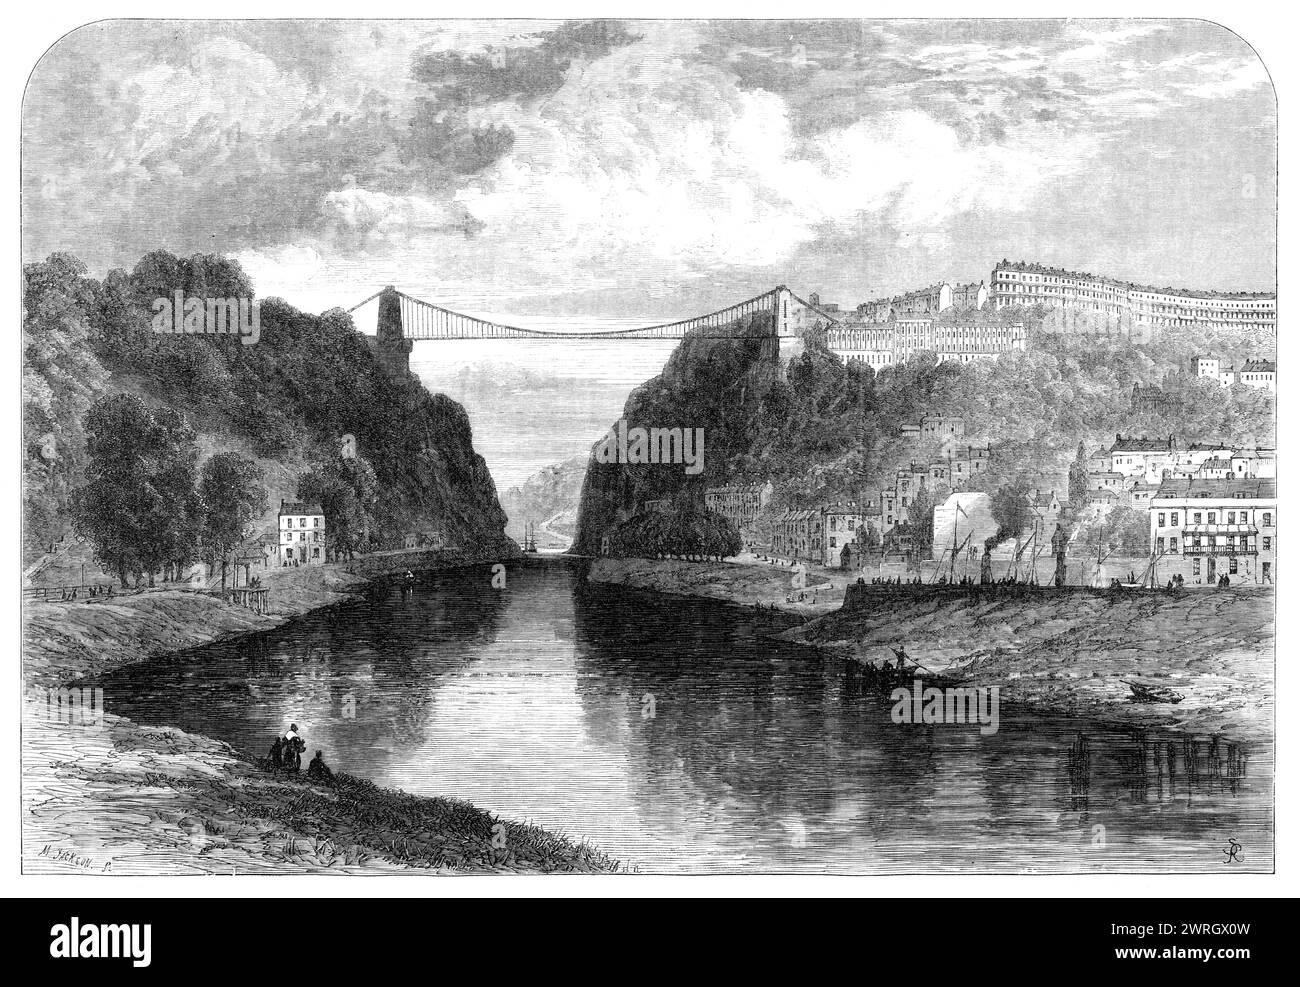 The suspension bridge over the Avon at Clifton, 1864. Bridge connecting Bristol and Clifton. 'Mr. Brunel's...estimate was &#xa3;57,000; but when &#xa3;45,000 had been spent only the towers had been built, and the work came to a stop. His design was a chain bridge of a single span of 700 ft., two chains passing over two towers, and being anchored deep in the limestone rocks behind them. In 1843 all the money was gone, and the scheme was in abeyance for want of funds...Mr. Brunel, as it happened, had been the engineer of Hungerford Bridge; and when, therefore, its chains had to be pulled down an Stock Photo